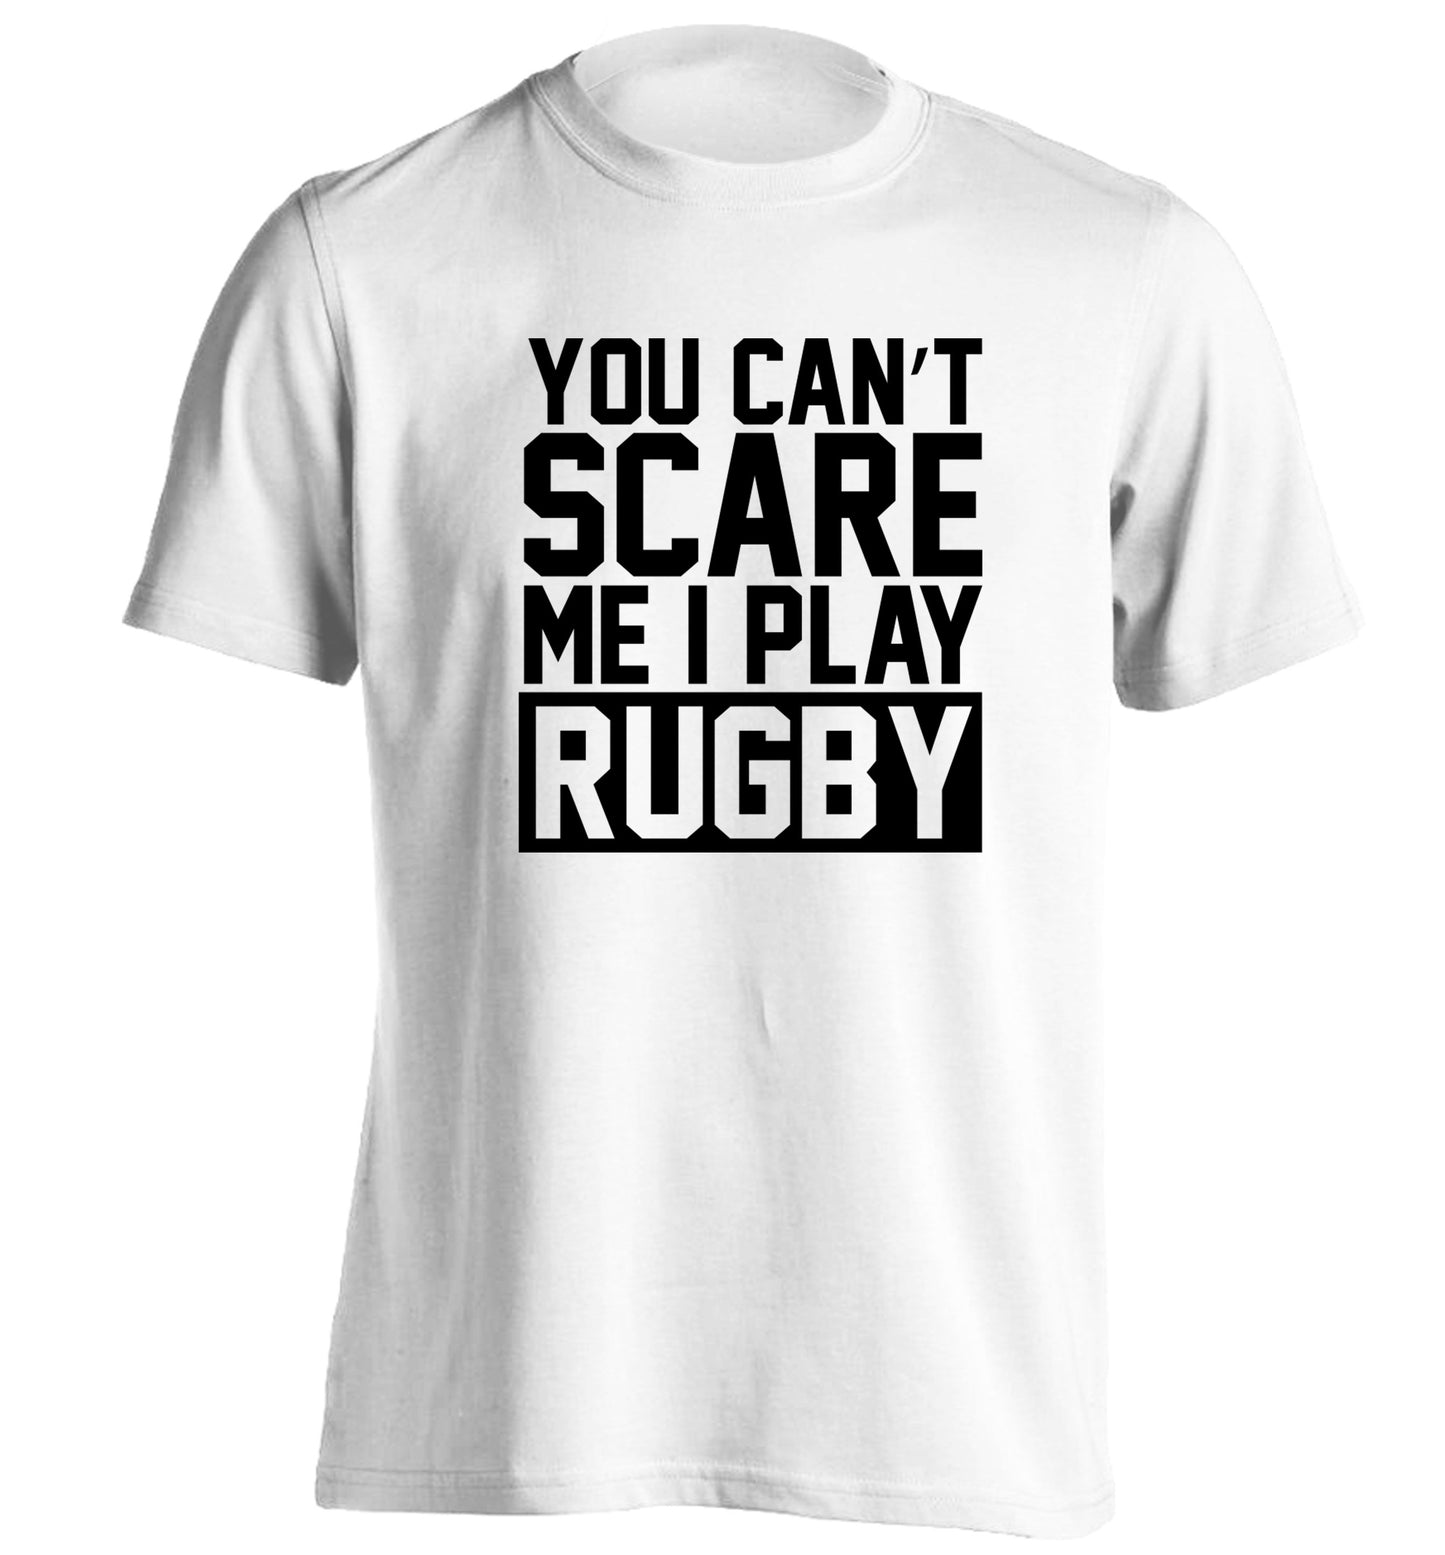 You can't scare me I play rugby adults unisex white Tshirt 2XL